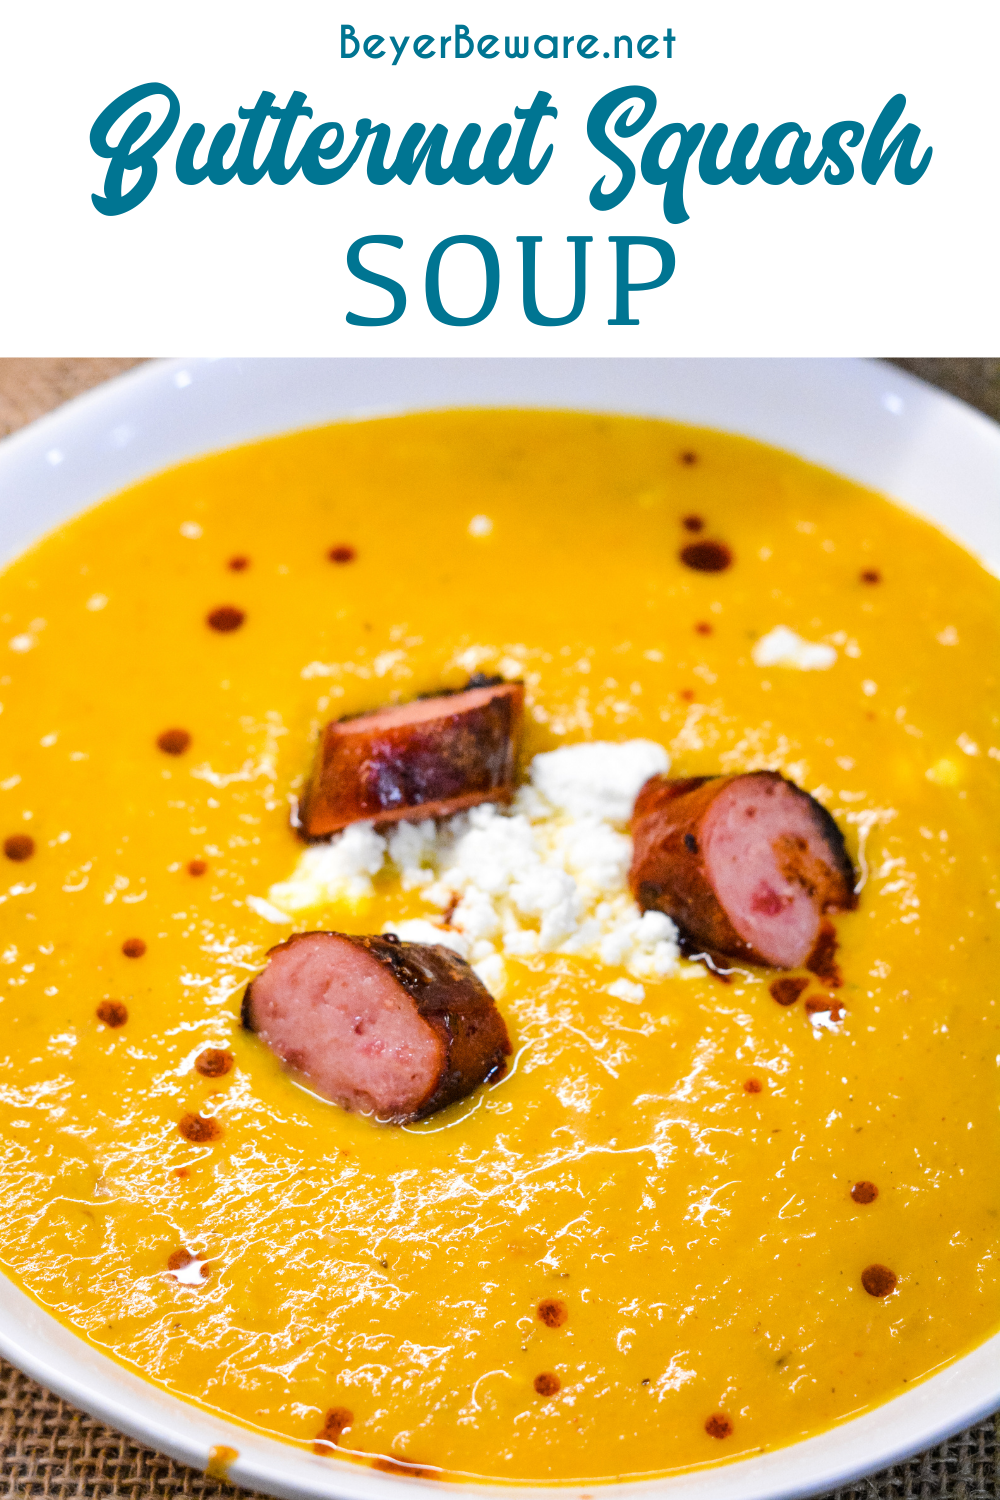 Butternut squash soup with smoked sausage is a savory, creamy roasted butternut squash soup with hints of chili, sage, onion and feta for a delish fall soup.